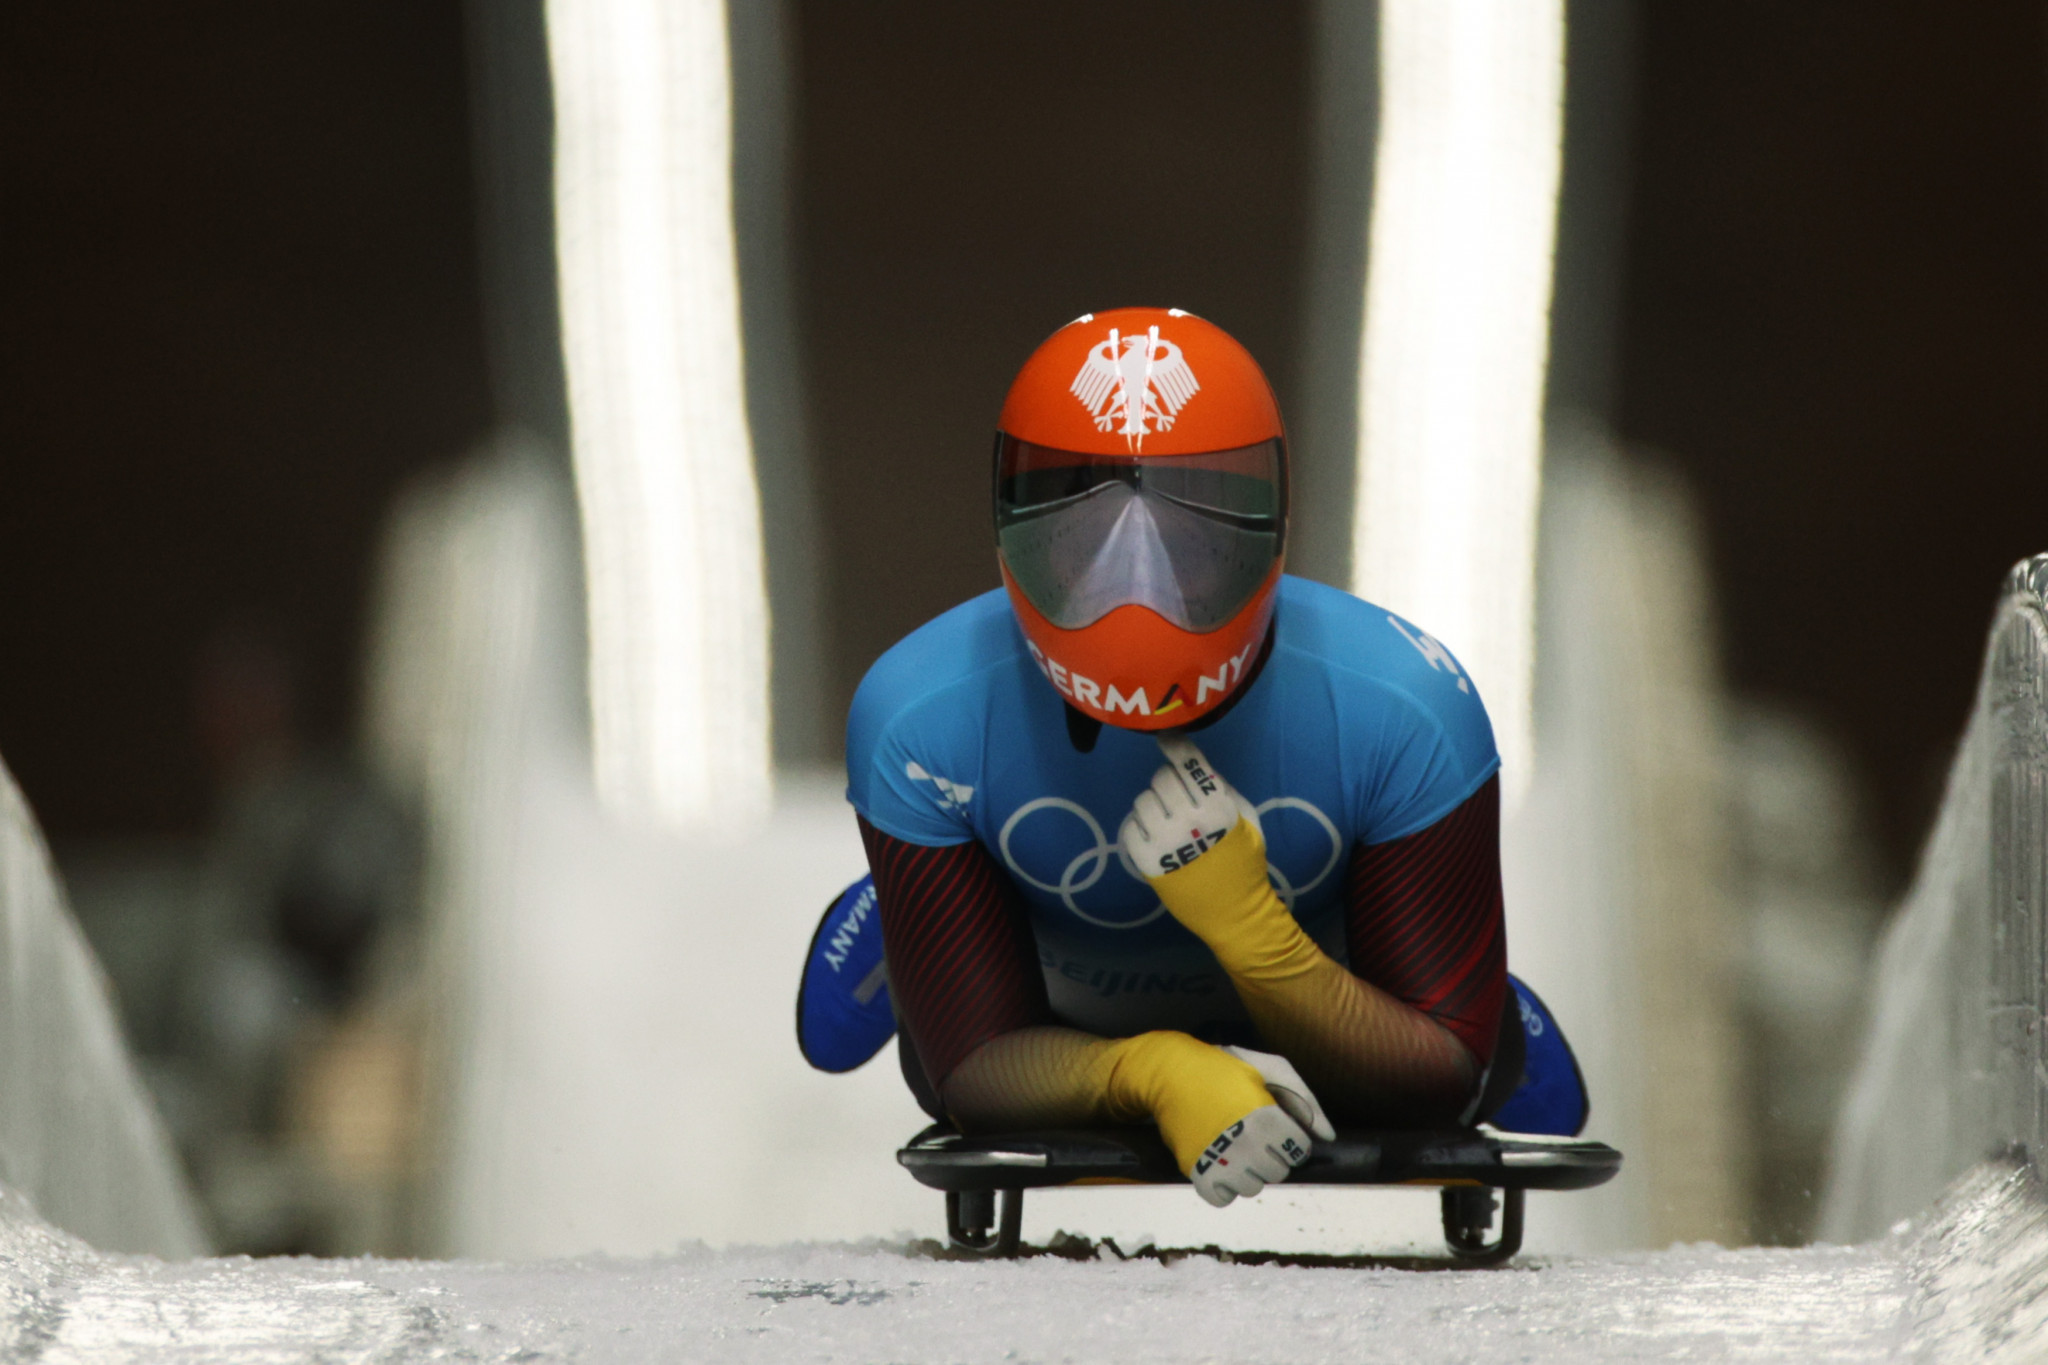 Christopher Grotheer won his second IBSF World Cup race of the season ©Getty Images